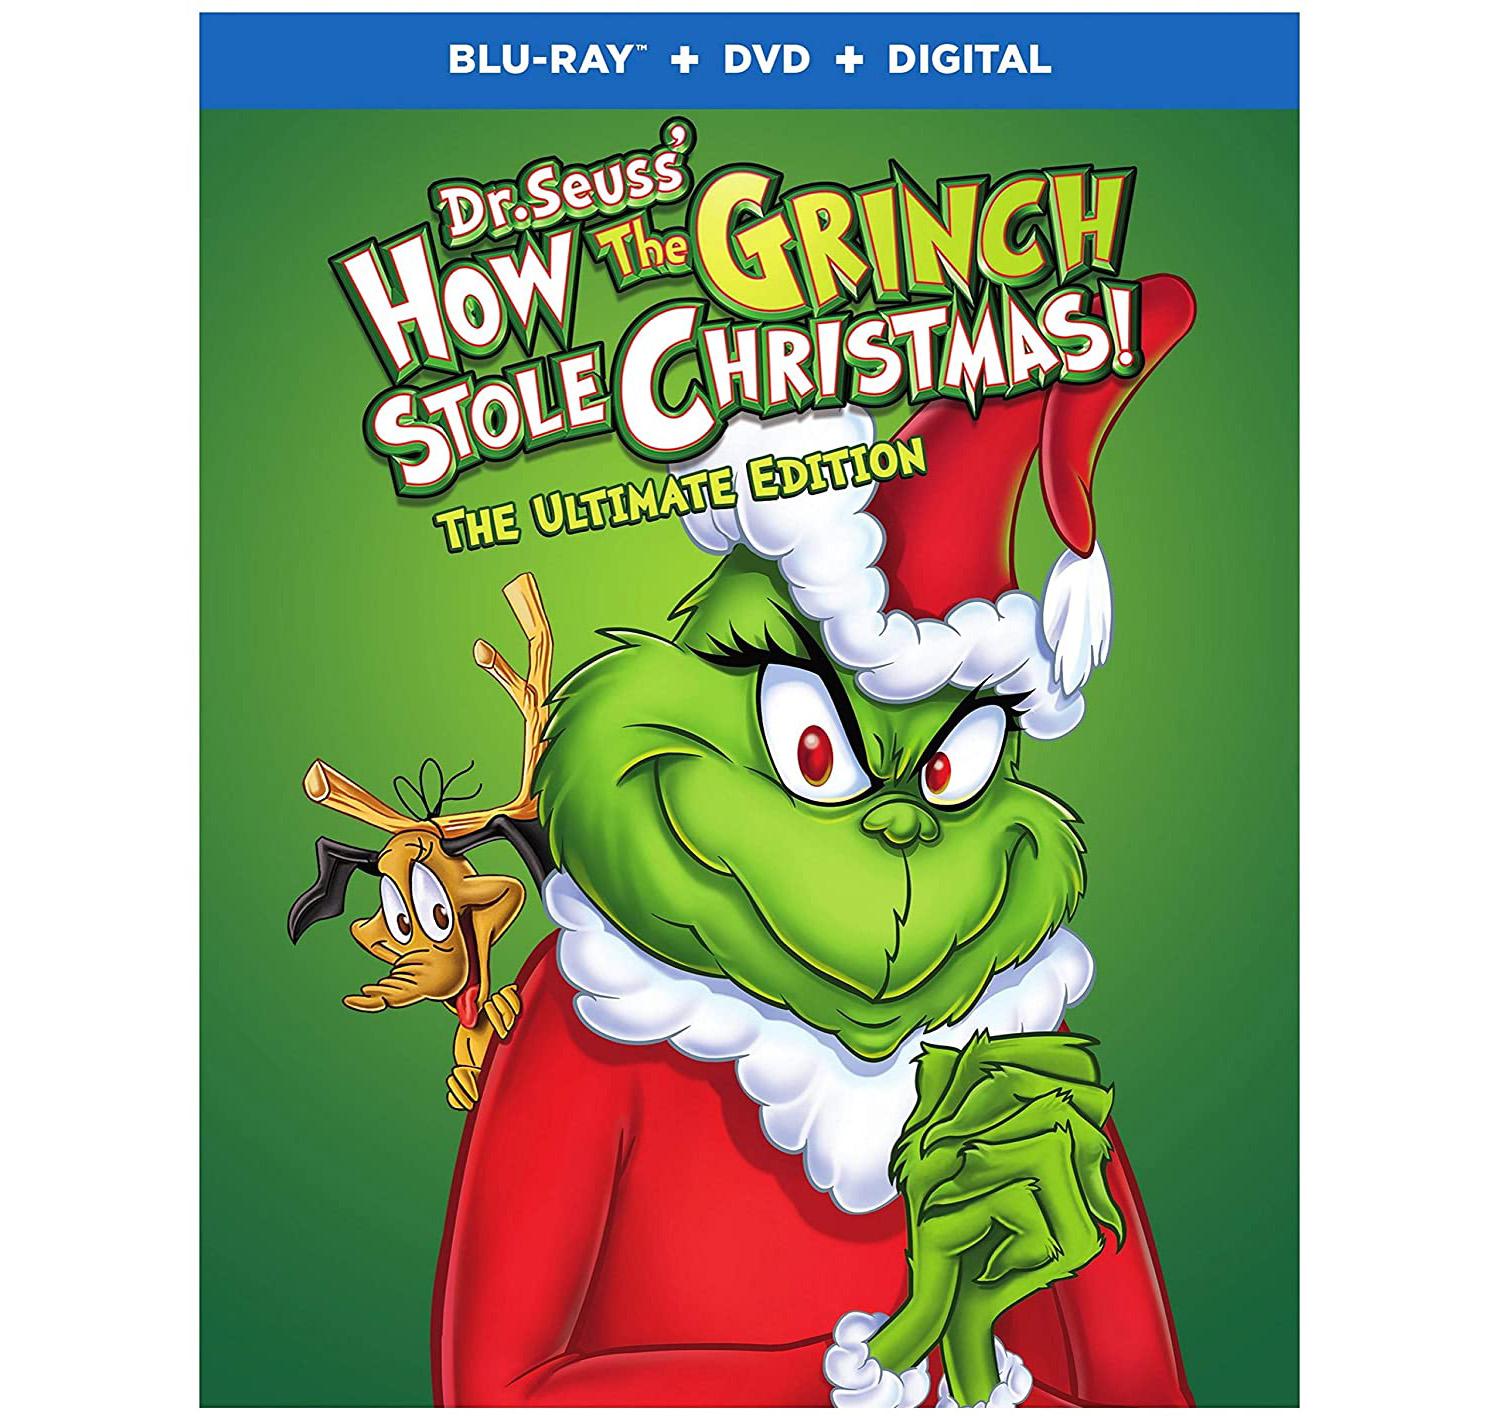 How the Grinch Stole Christmas Ultimate Edition Blu-ray for $5.99